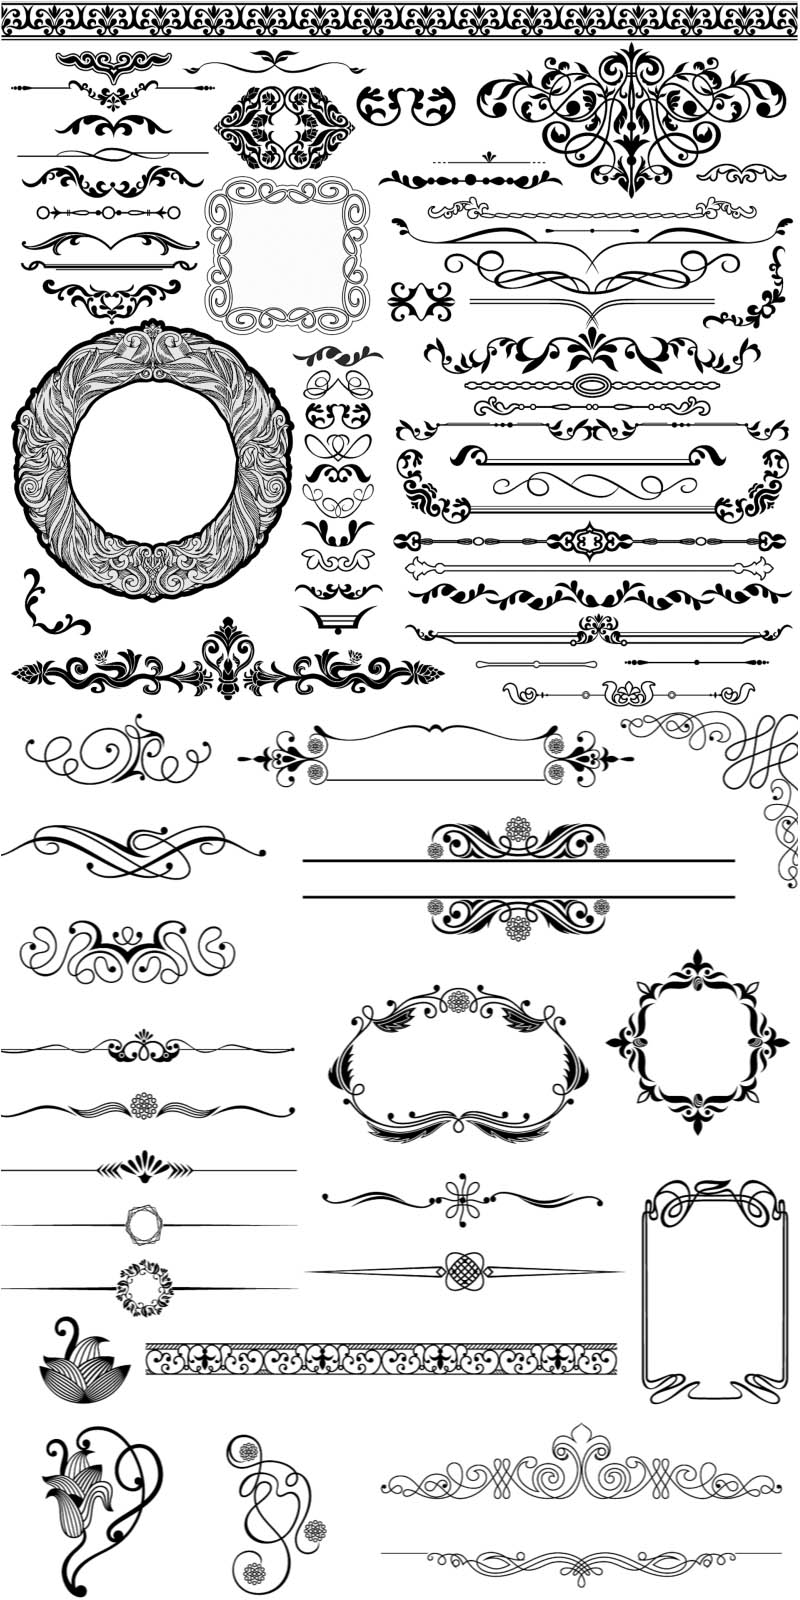 Ornamental elements and frames vector